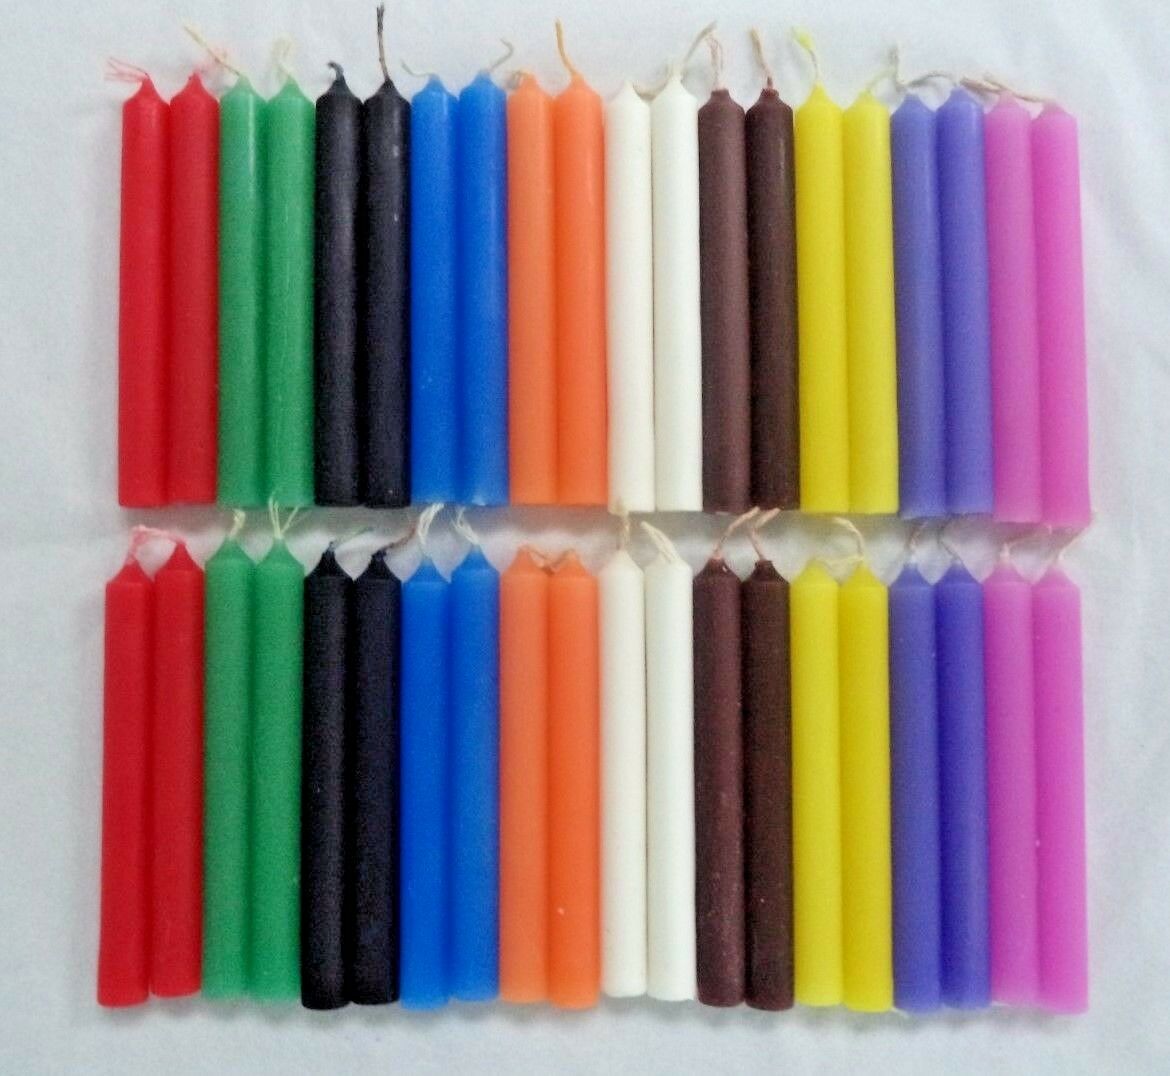 Mini Chime Spell Candles 2 Sets Of 20 = 40 Candles Assorted (wicca Altar) Set #2